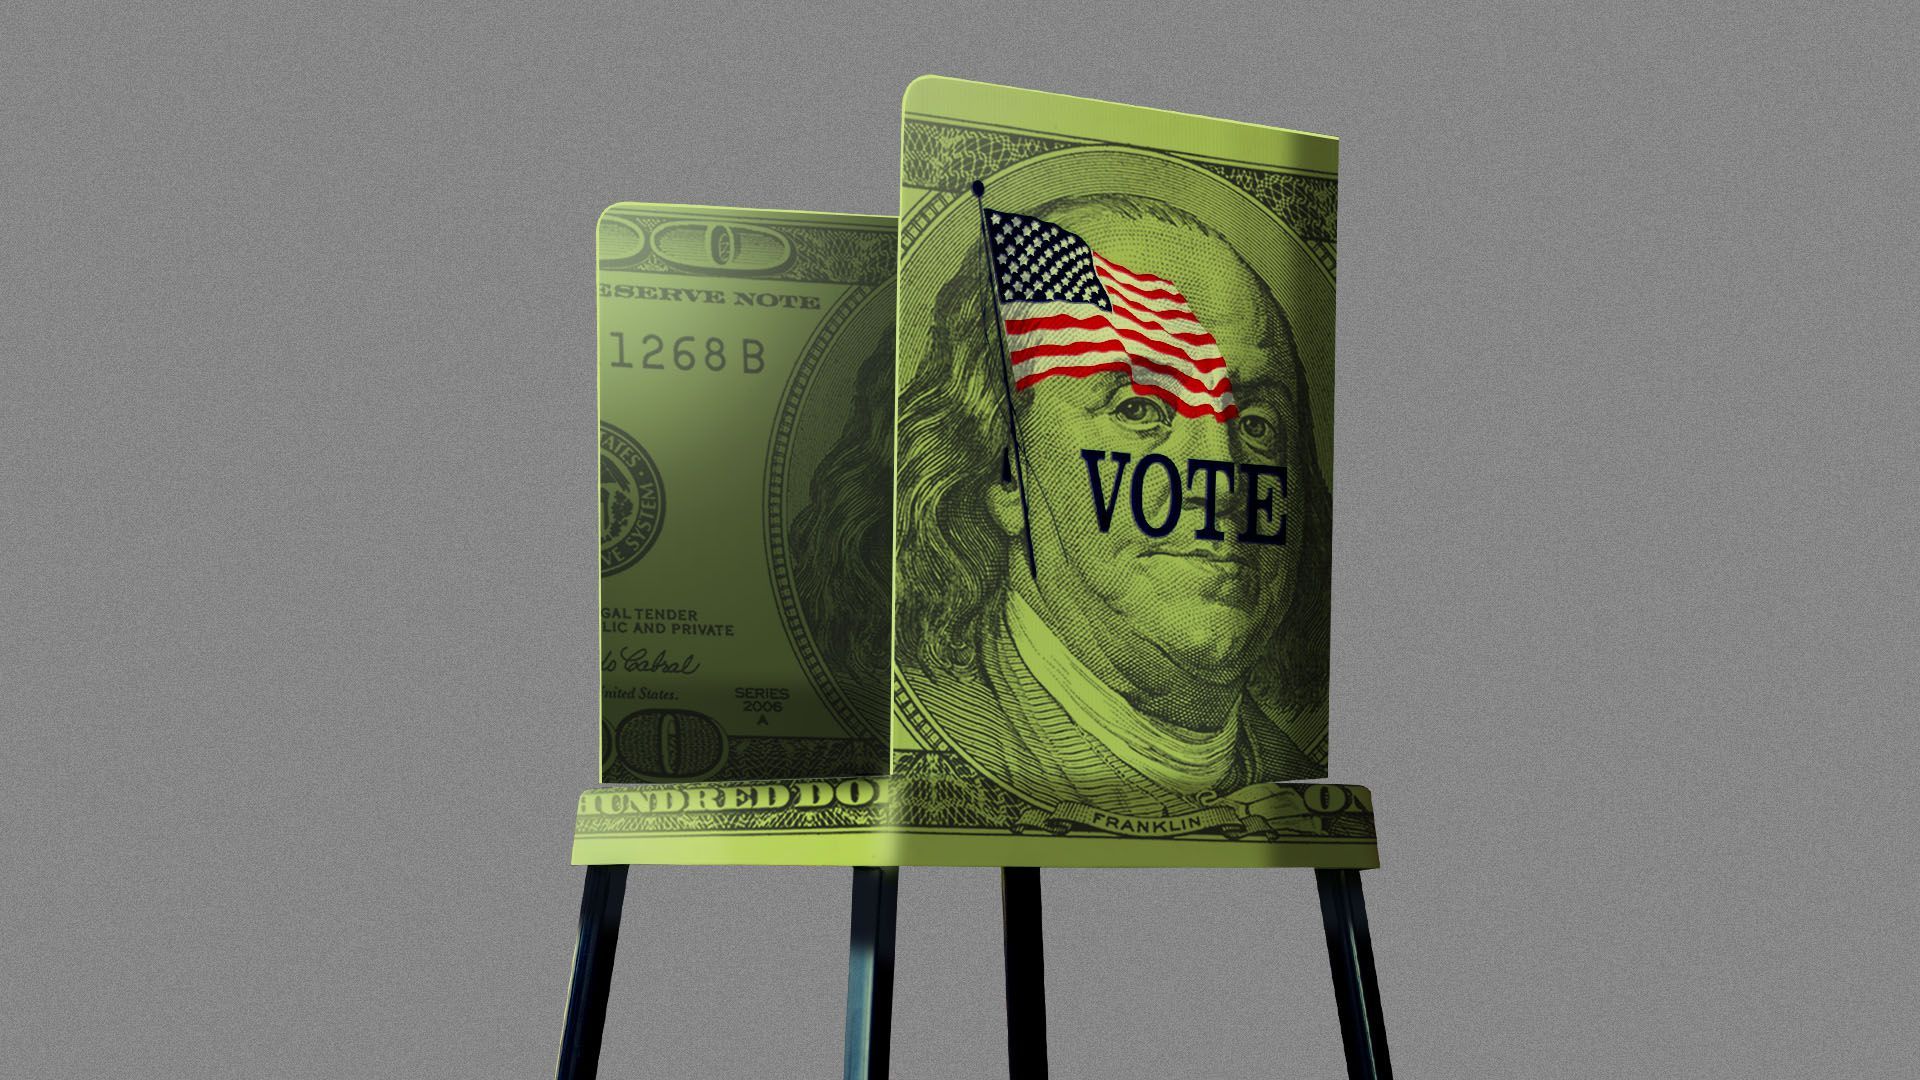 Illustration of a voting booth made out of money